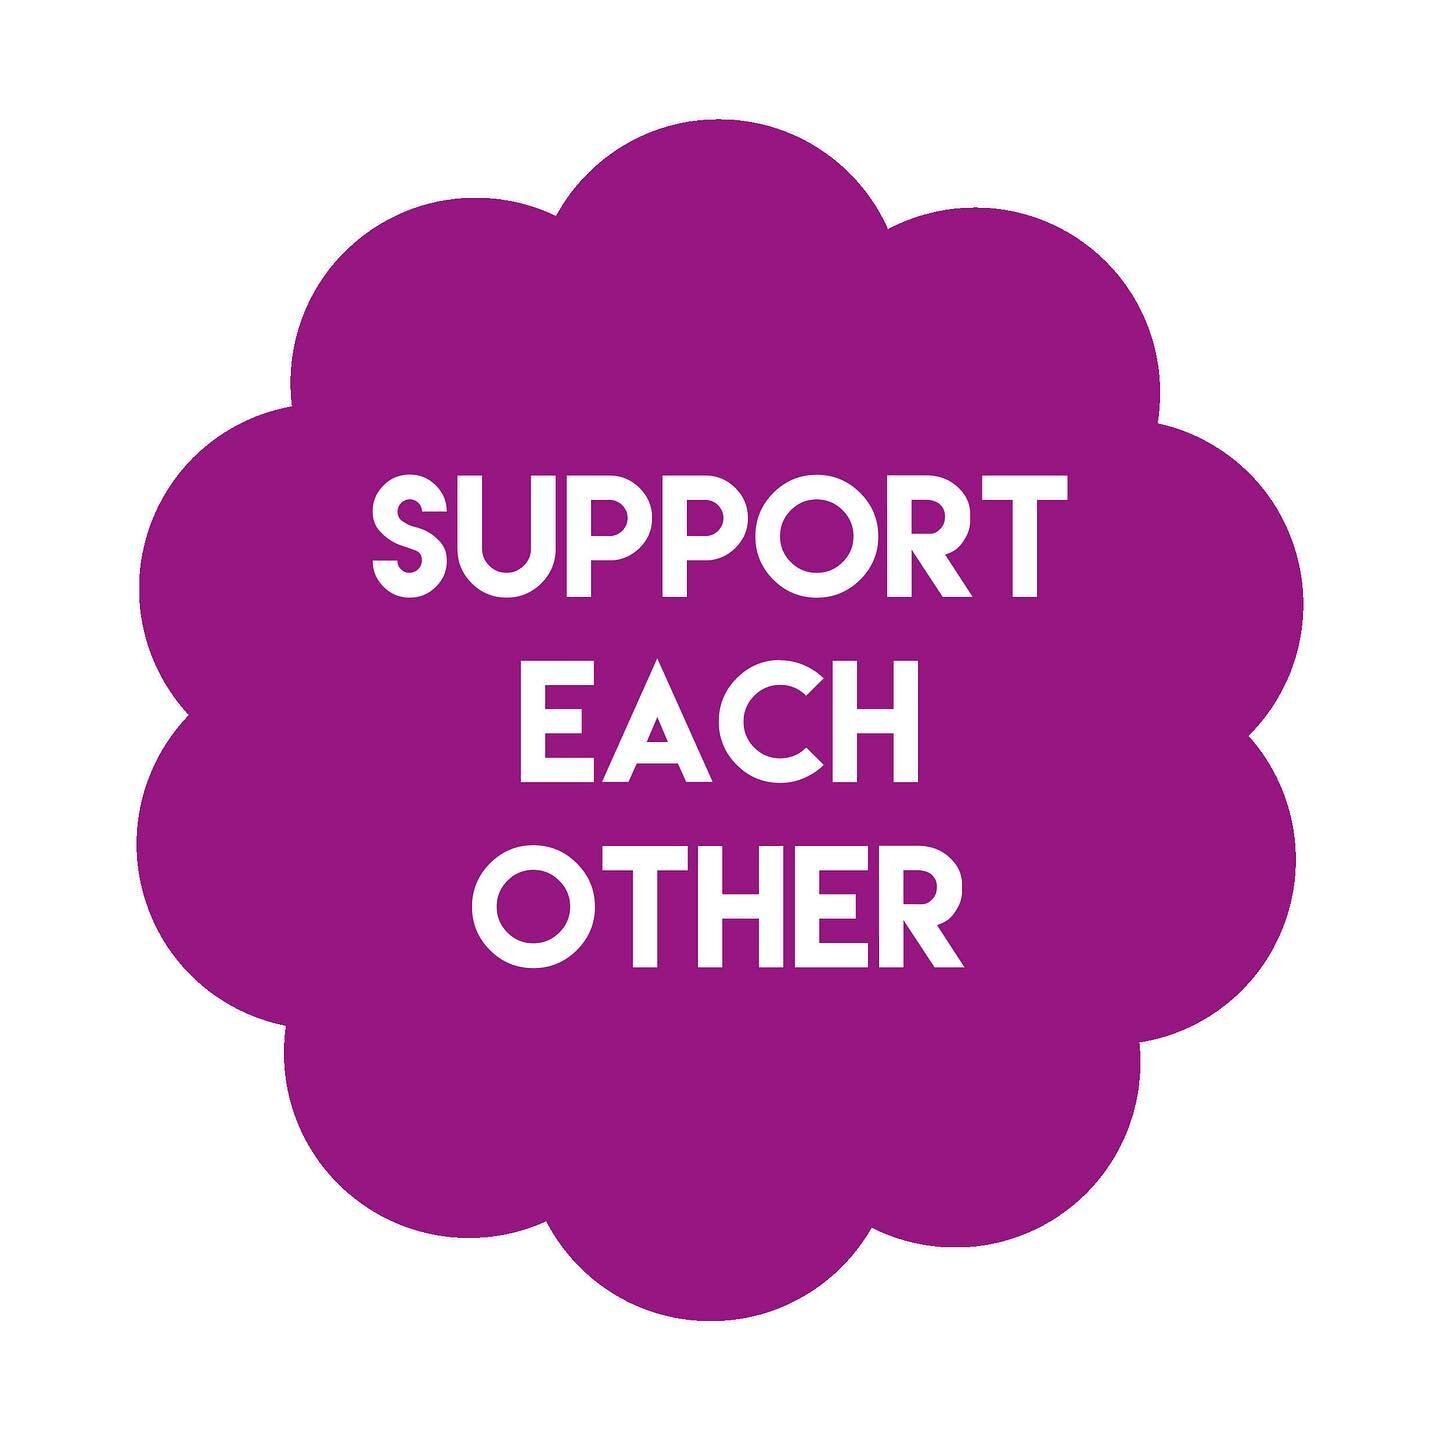 Come together, support each other and make a stand against hatred 🌈
.
.
.
.
.
#standagainstracism #supporteachother #mumssupportingmums #unitetogether #bloombabyclasses